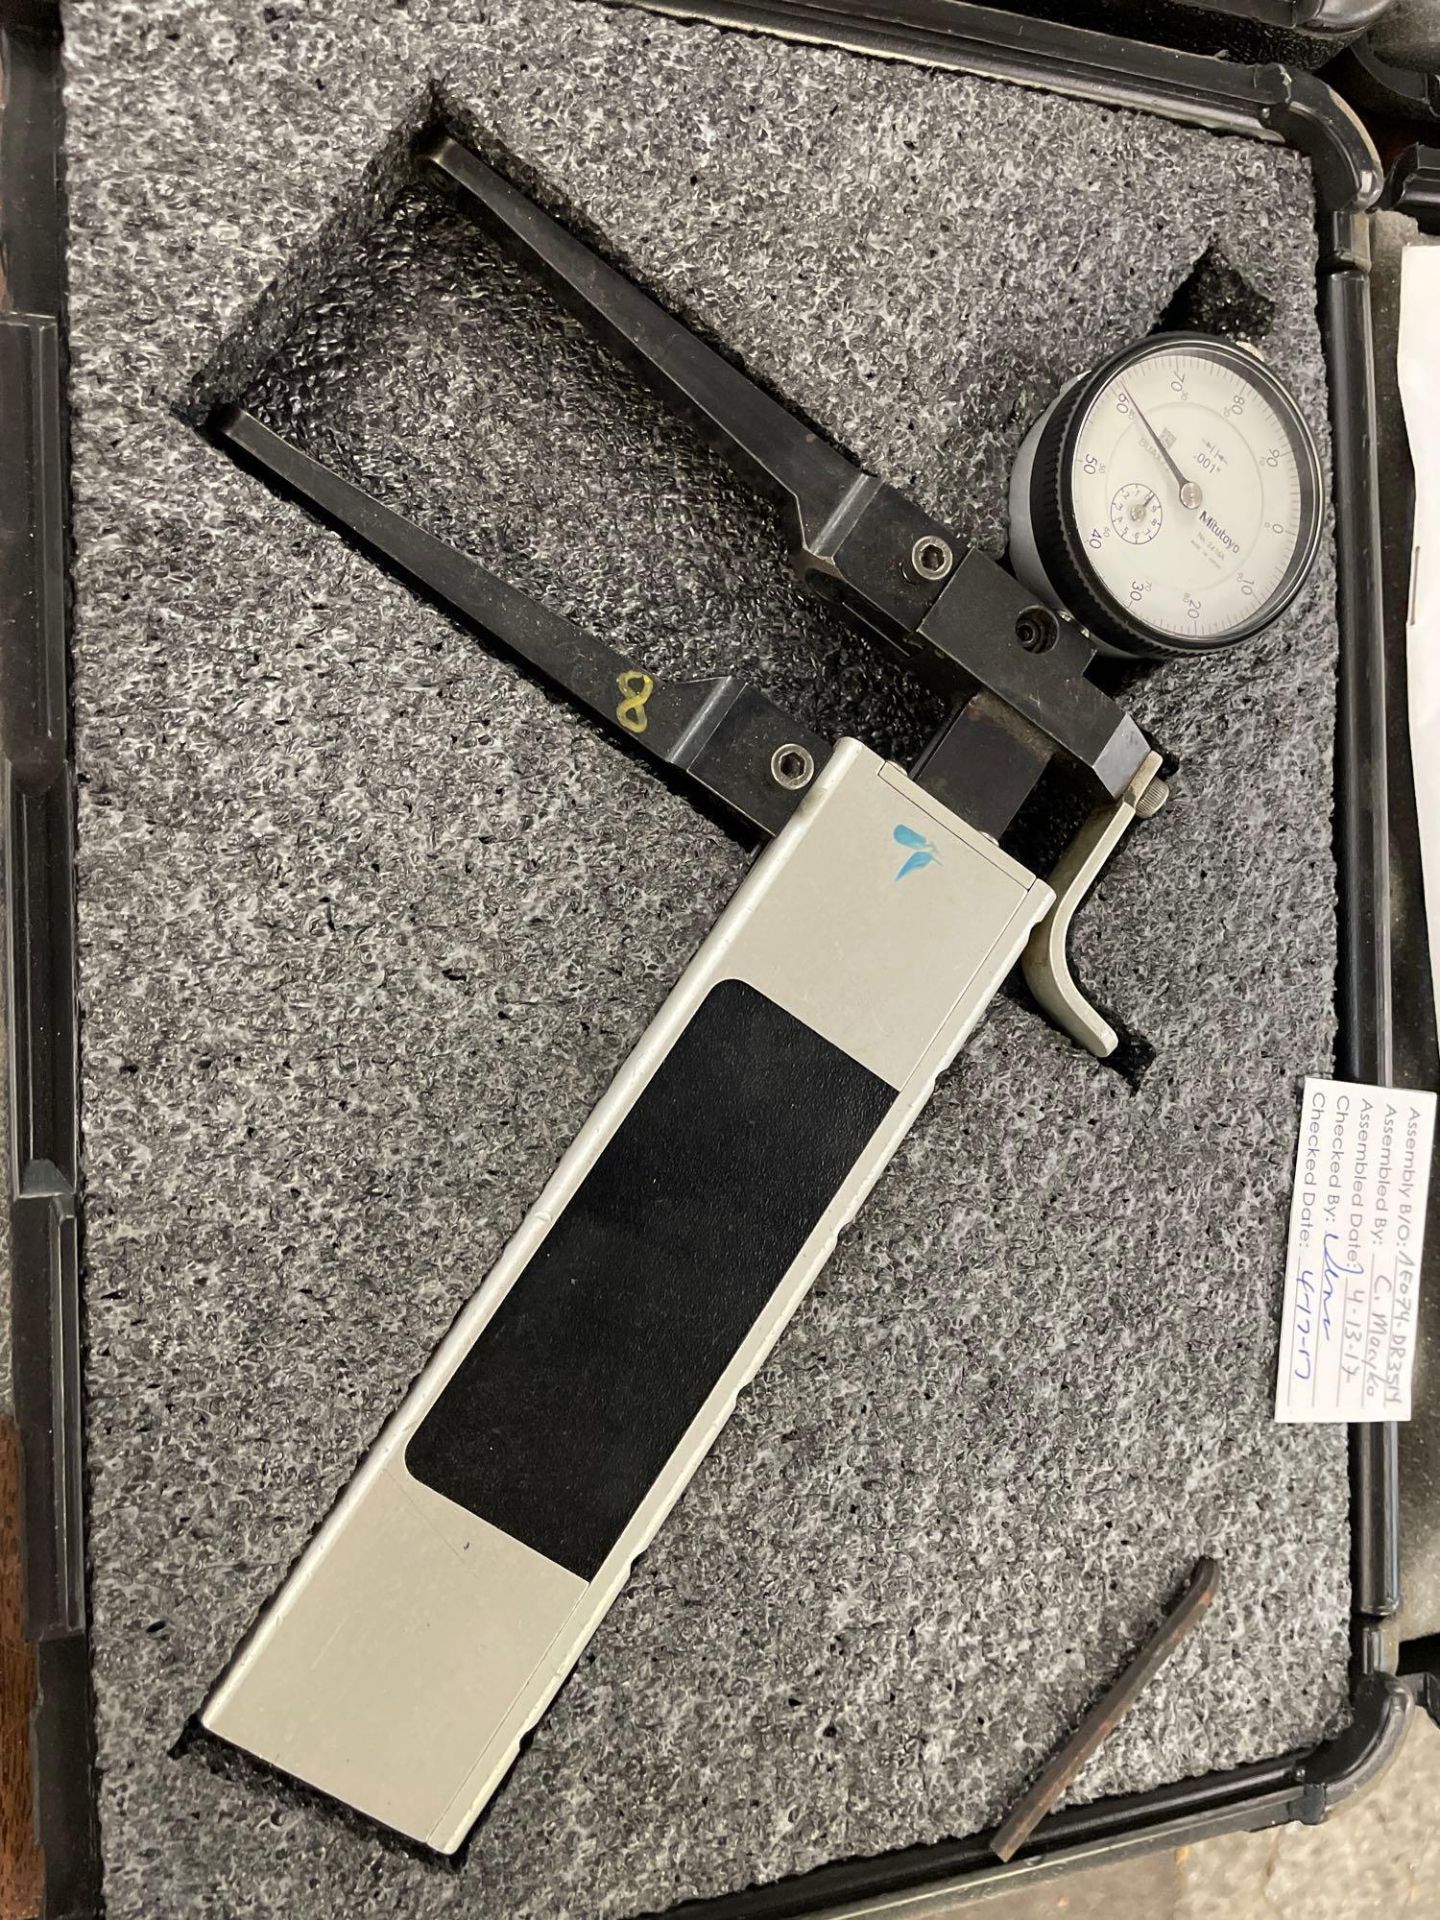 Lot of 2 GAGEMAKER Internal Taper Gage Model: IT-6000 in GAGEMAKER Box. See photo. - Image 3 of 10